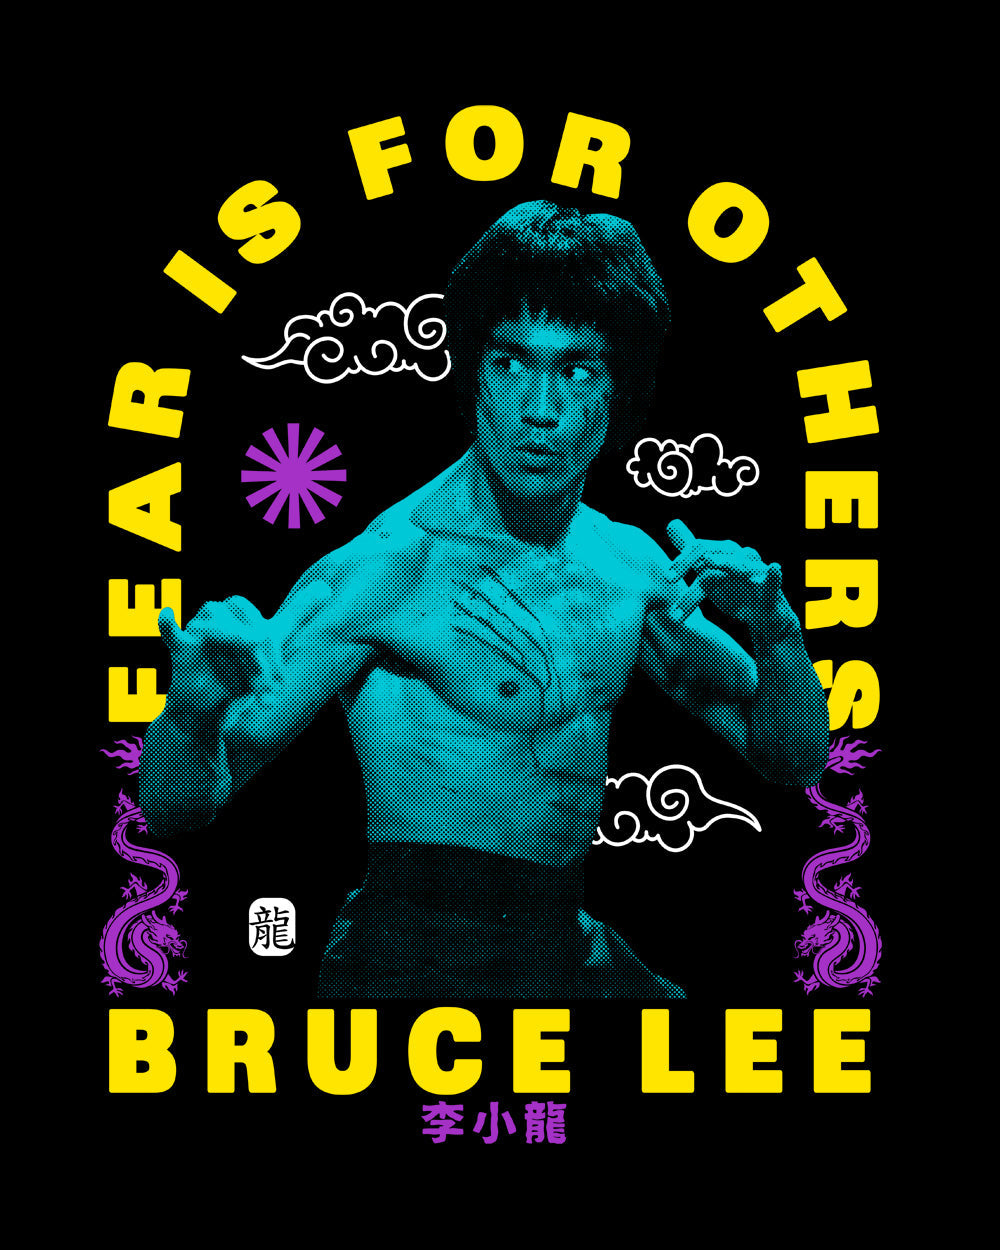 Bruce Lee Fear Is For Others Wing Chung Martial Arts Motivation Gym Workout Training Cotton  T-Shirt